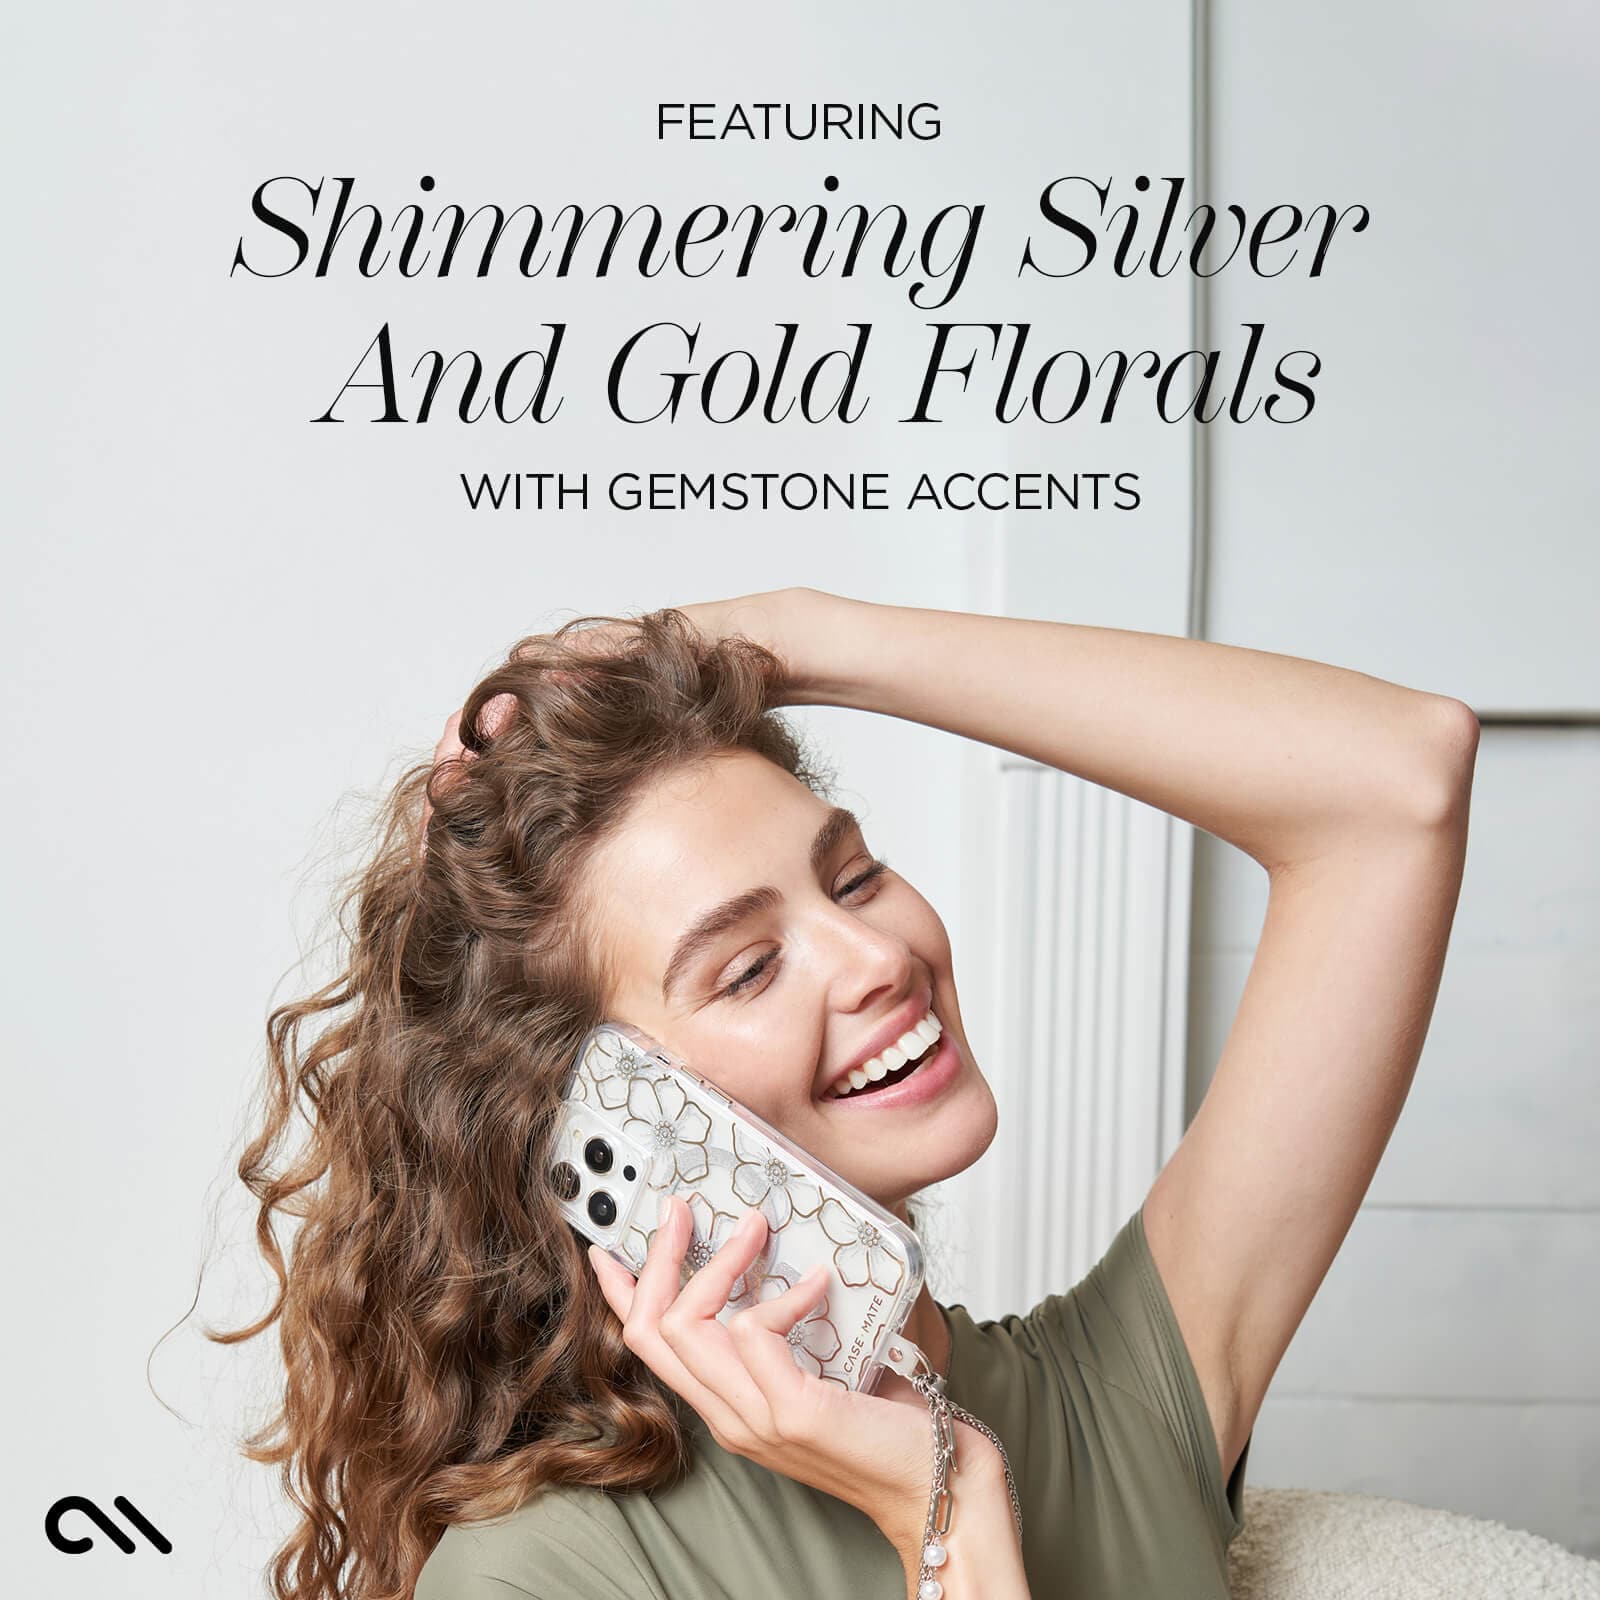 FEATURING SHIMMERING SILVER AND GOLD FLORALS WITH GEMSTONE ACCENTS